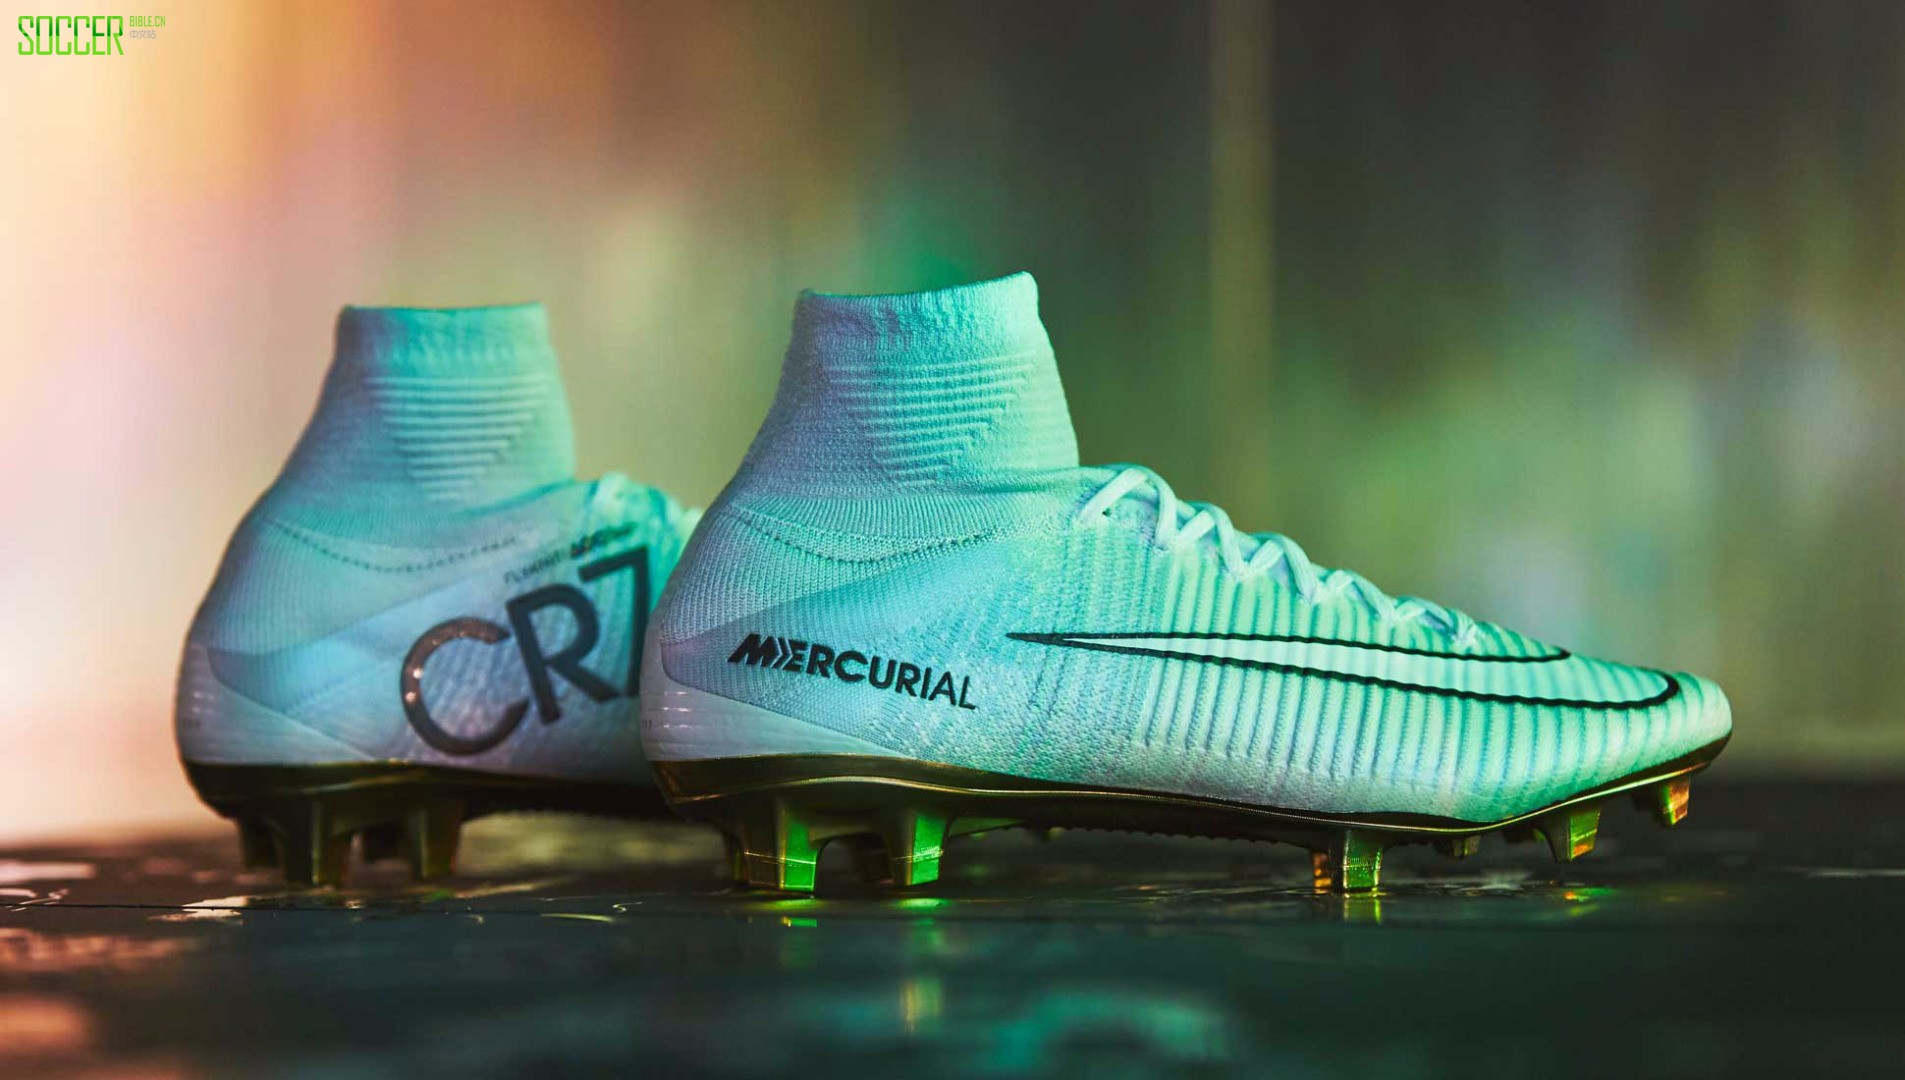 Closer Look at the Nike Mercurial Superfly CR7 Vitrias : Football Boots : Soccer Bible